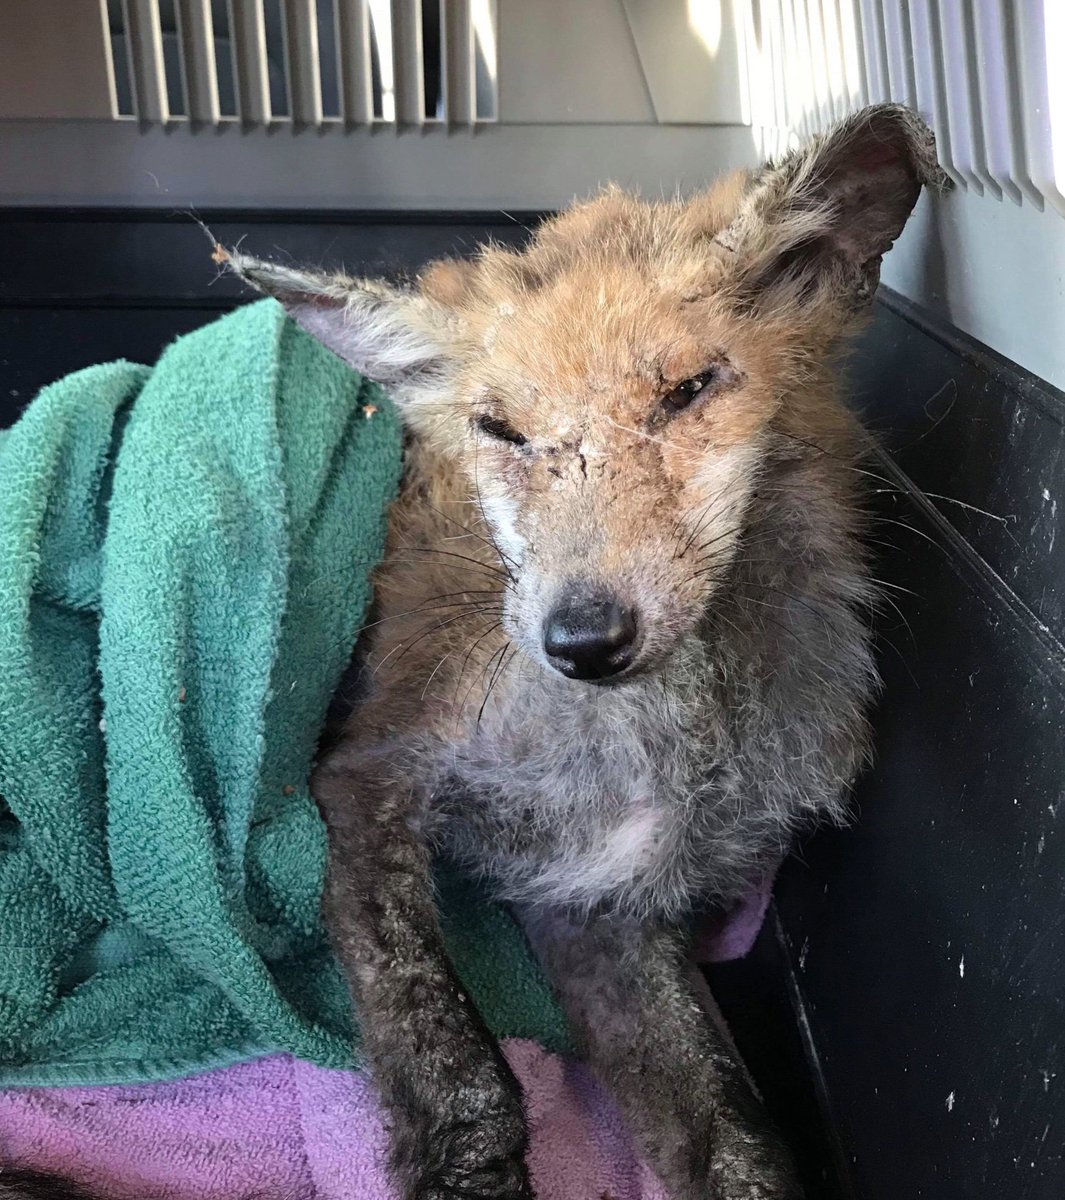 This poorly baby is suffering from severe Mange. My heart breaks but I am proud to be part of the team that will do their upmost to try & help the sick & injured Wildlife of Kent. To help with Vet bills: PayPal lorraine@kentwildliferescue.org.uk #CharityTuesday @boost4charity